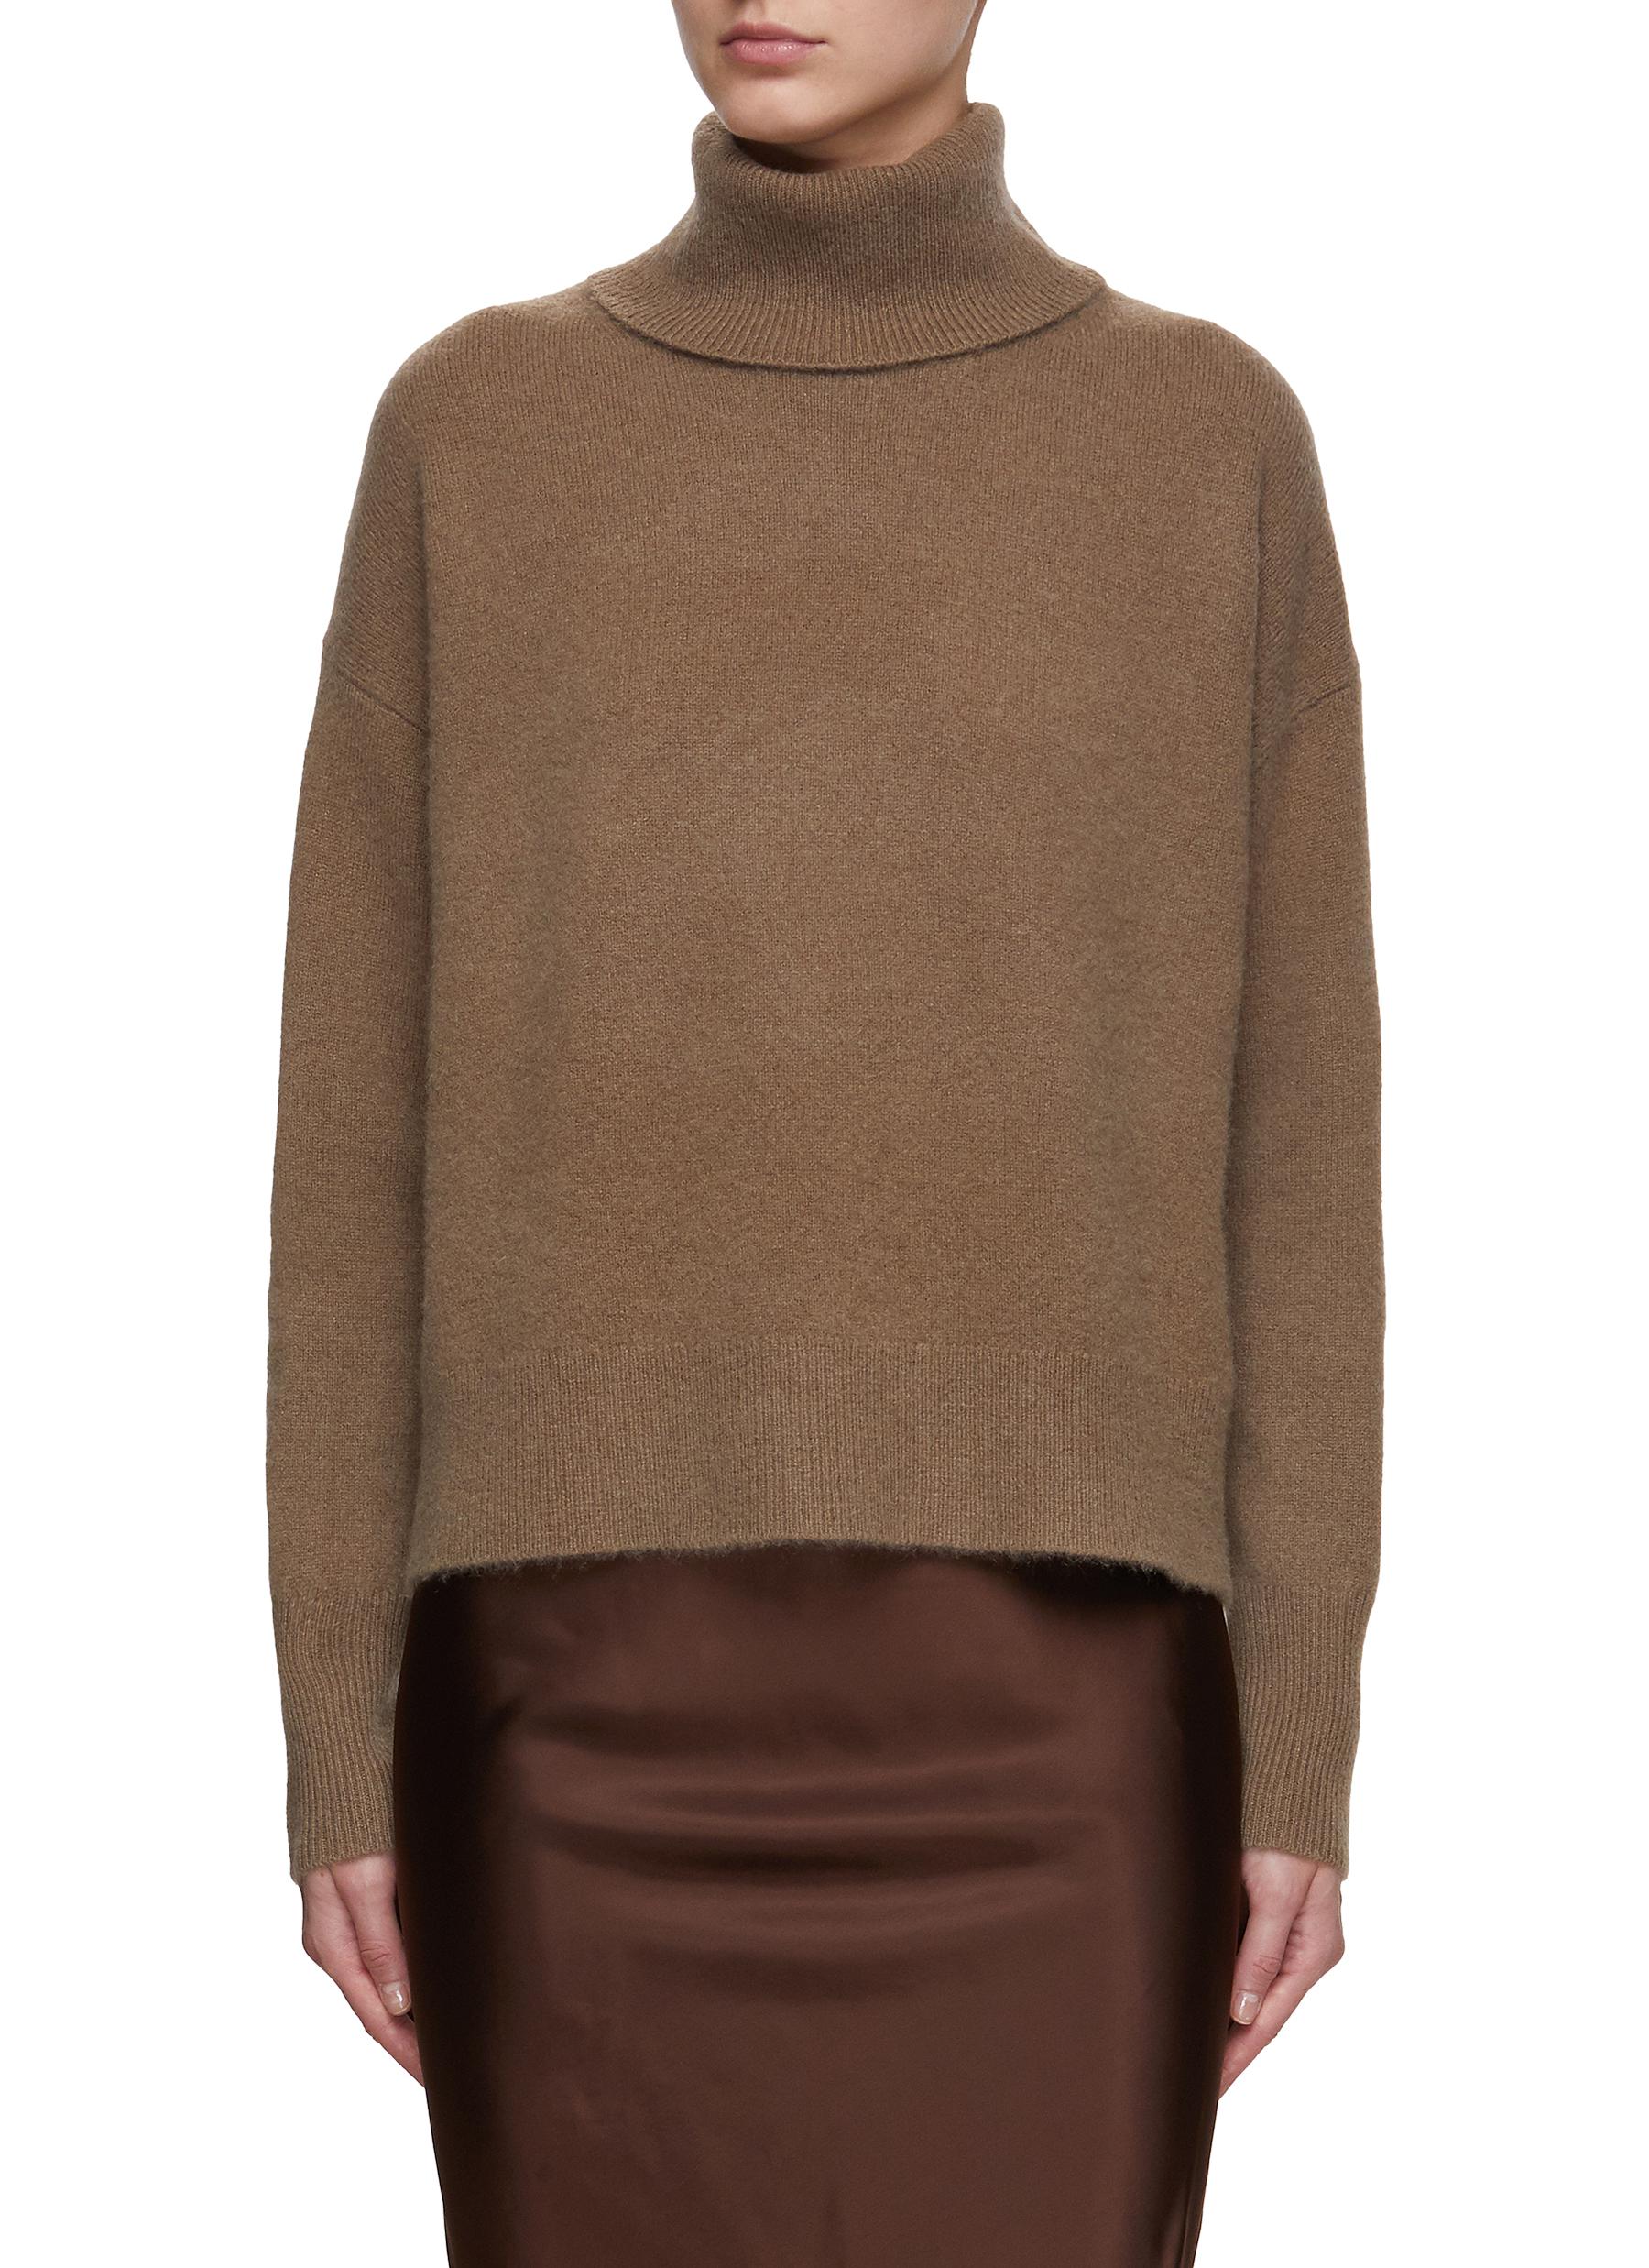 Brushed Cashmere Blend Knit Sweater